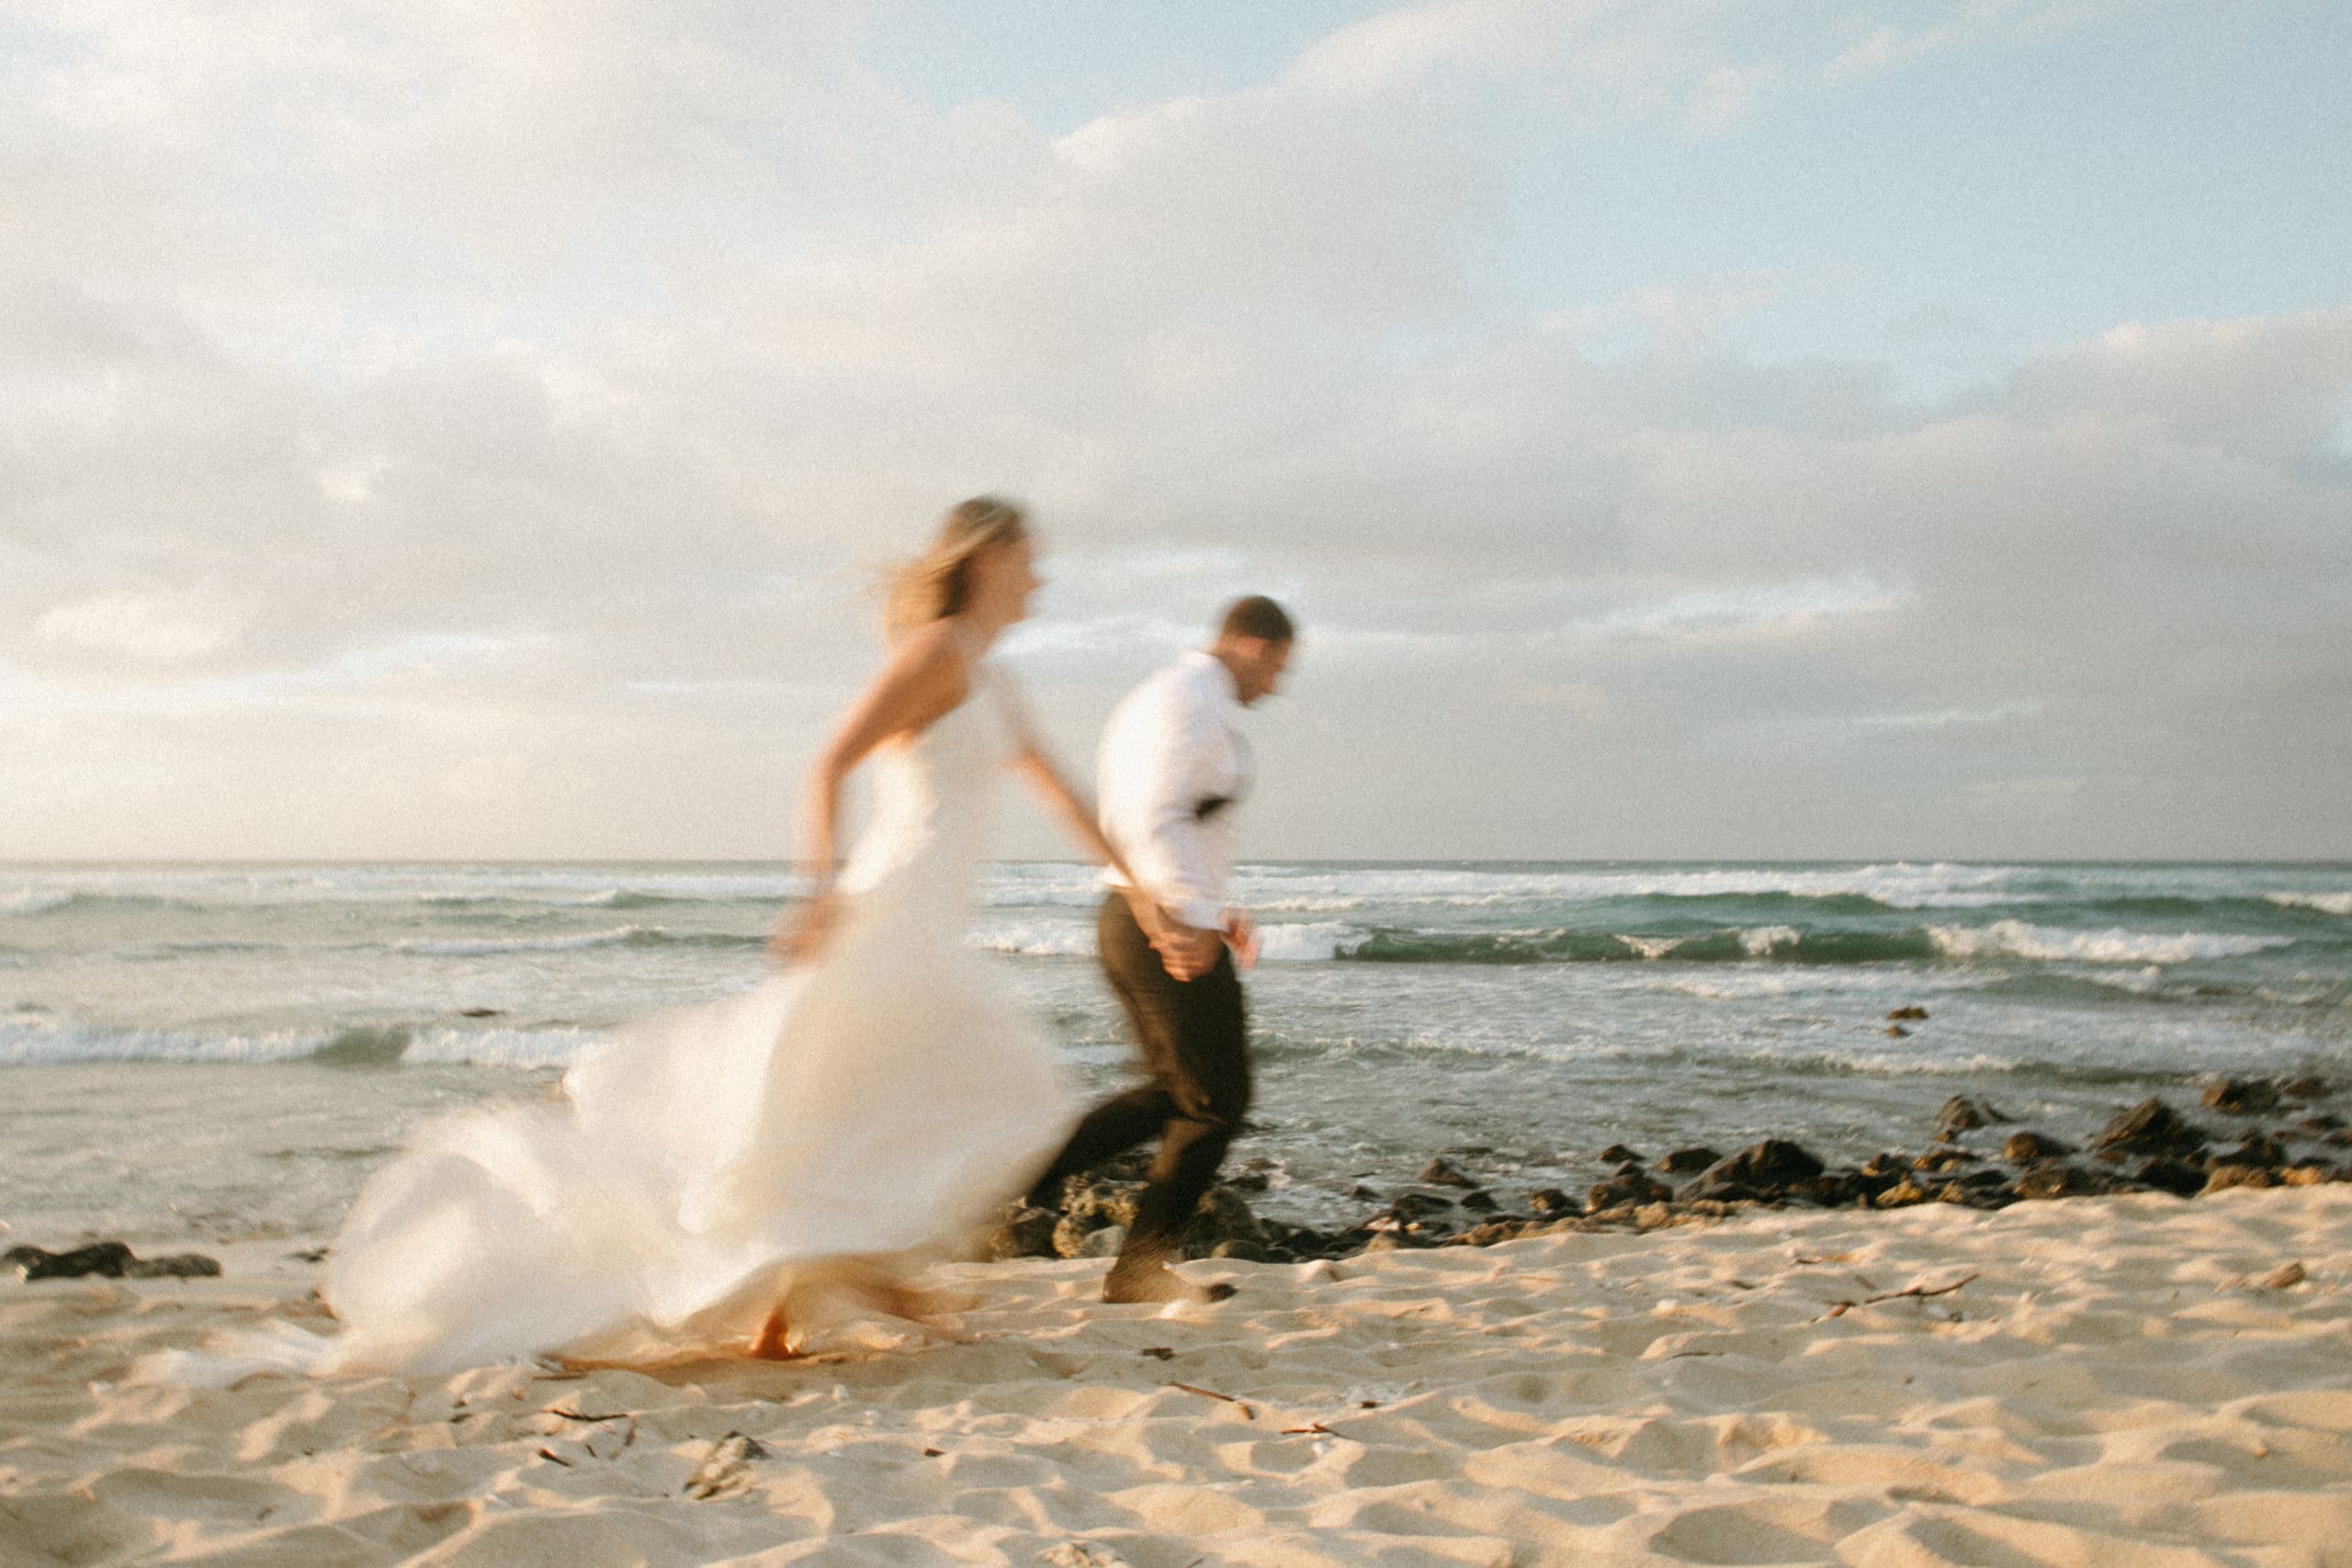 North and East Shore Oahu elopement and wedding venues